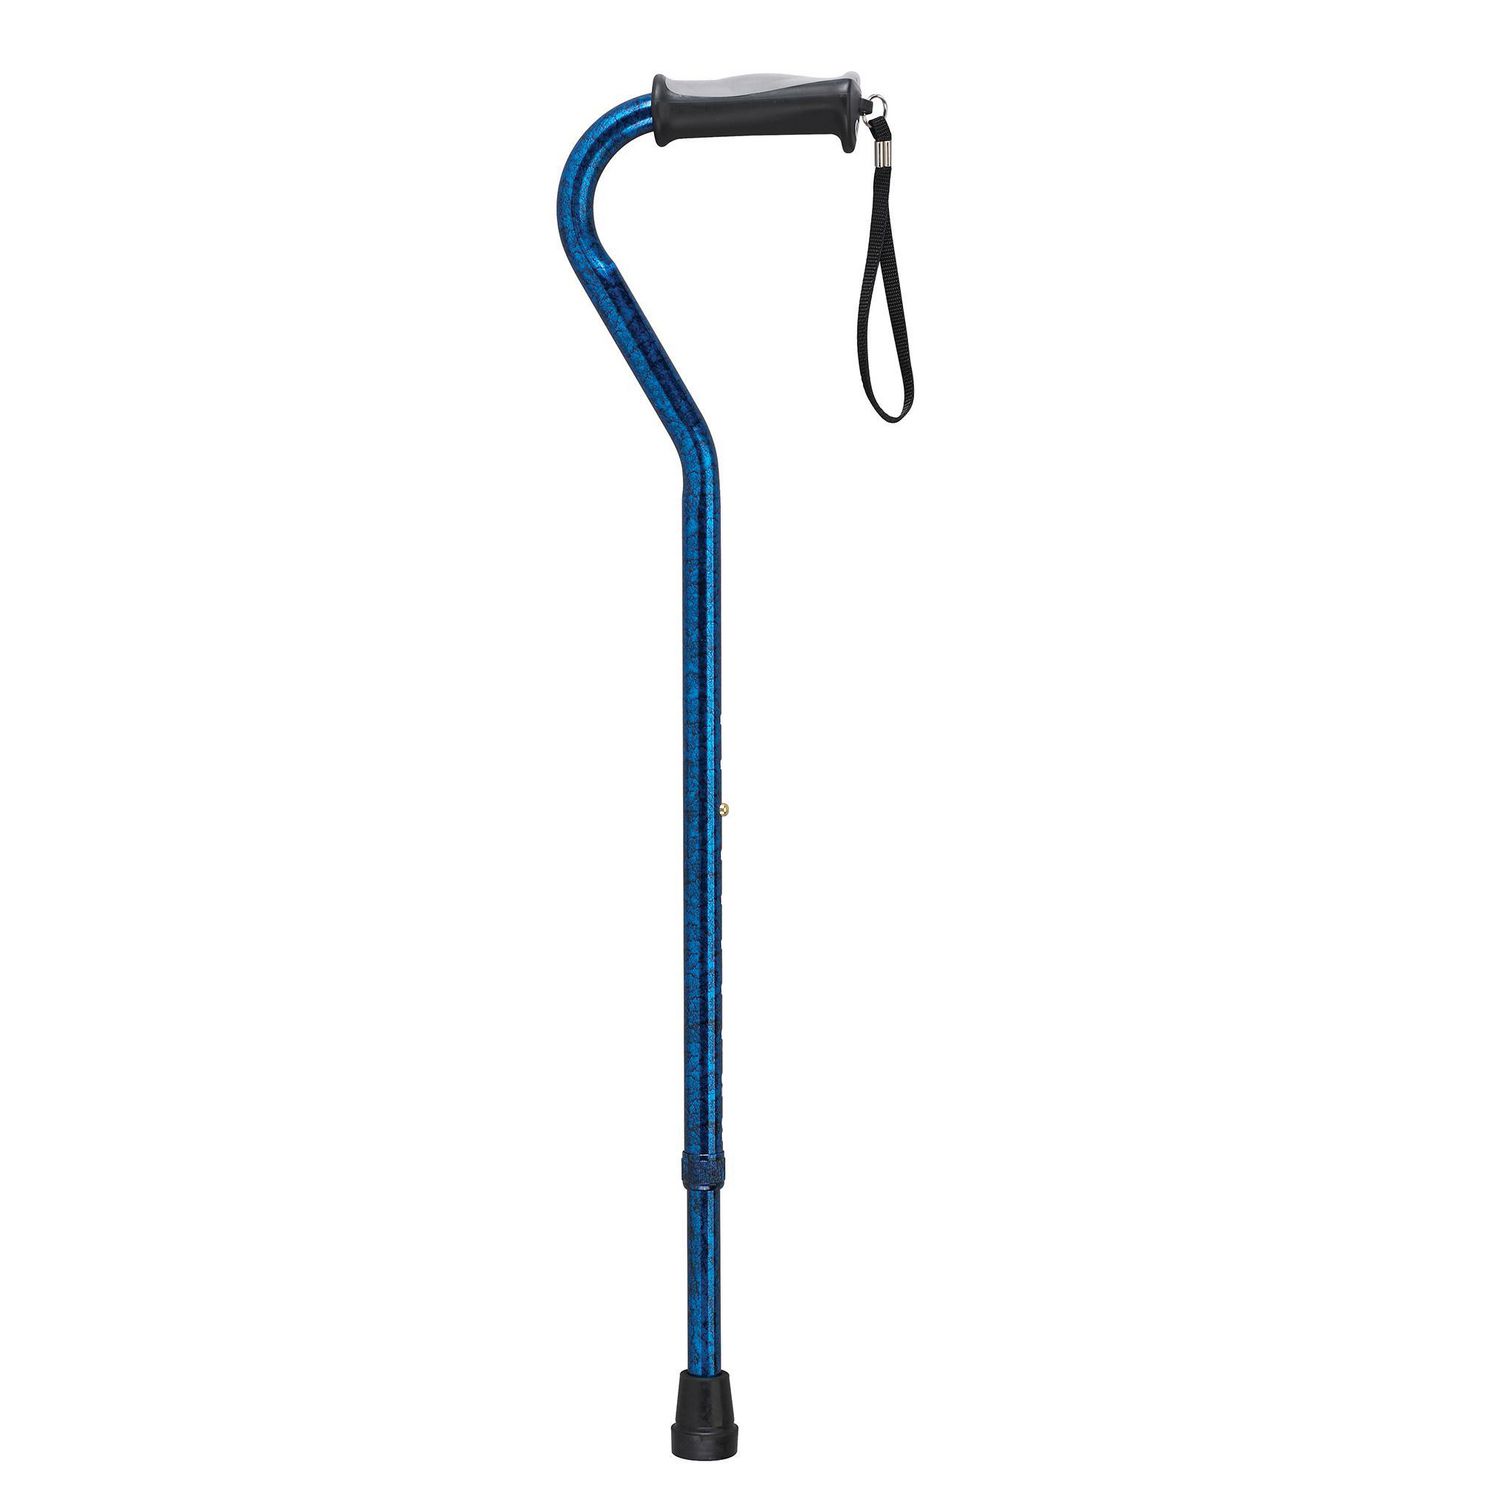 Folding Cane w/ Derby Handle Grip - Free Shipping - Home Medical Supply